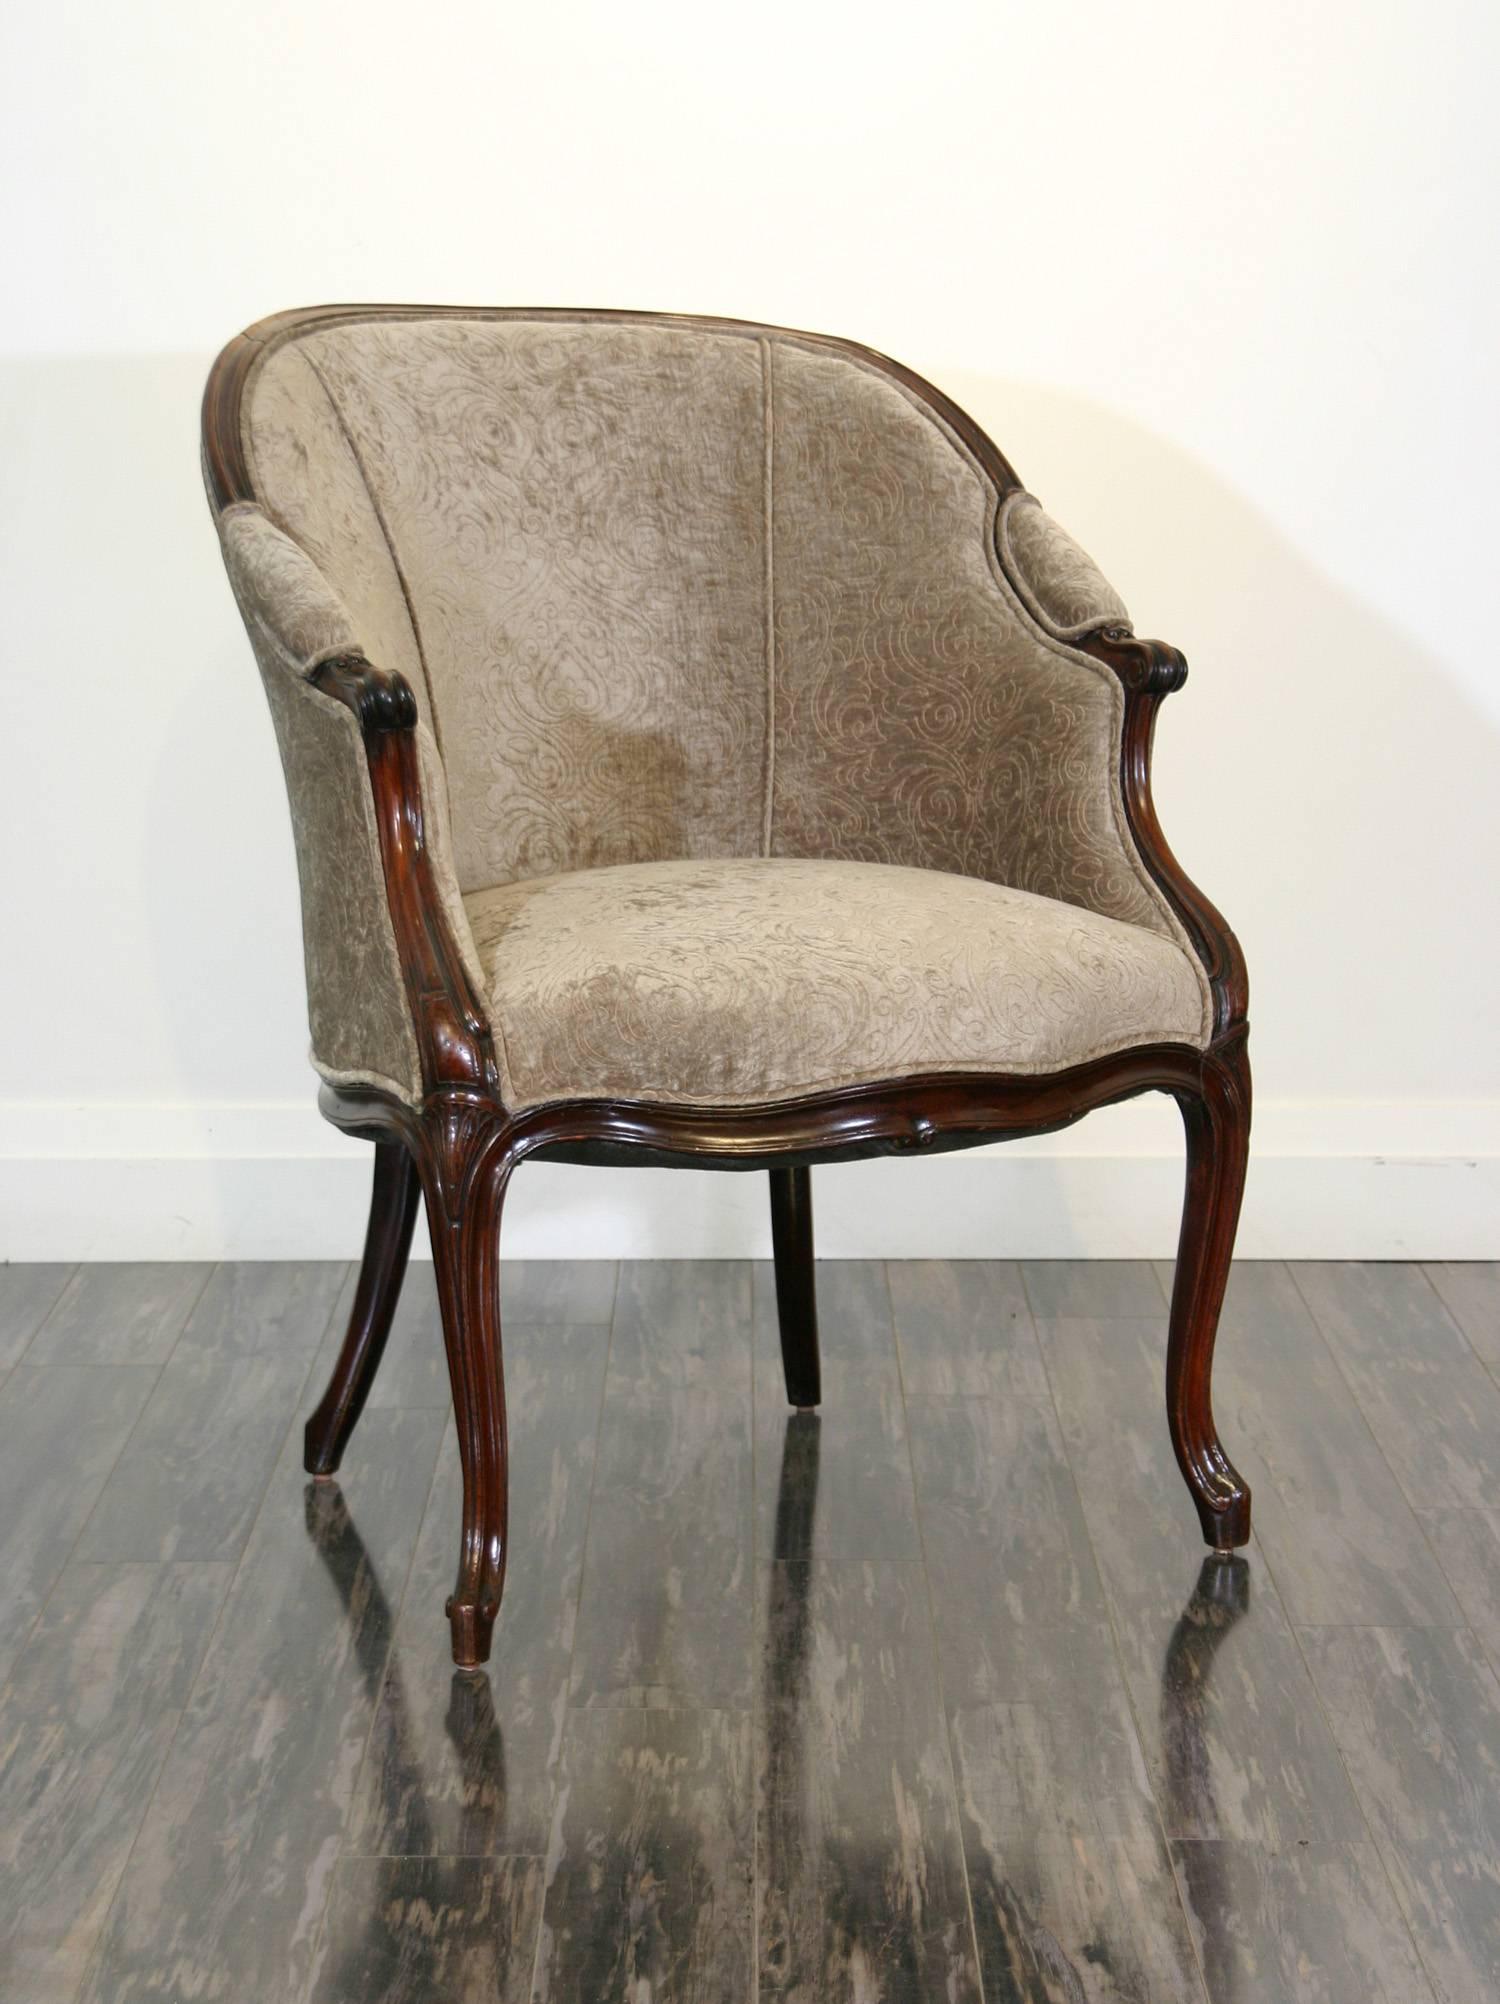 An English George III period mahogany tub chair in the French taste.